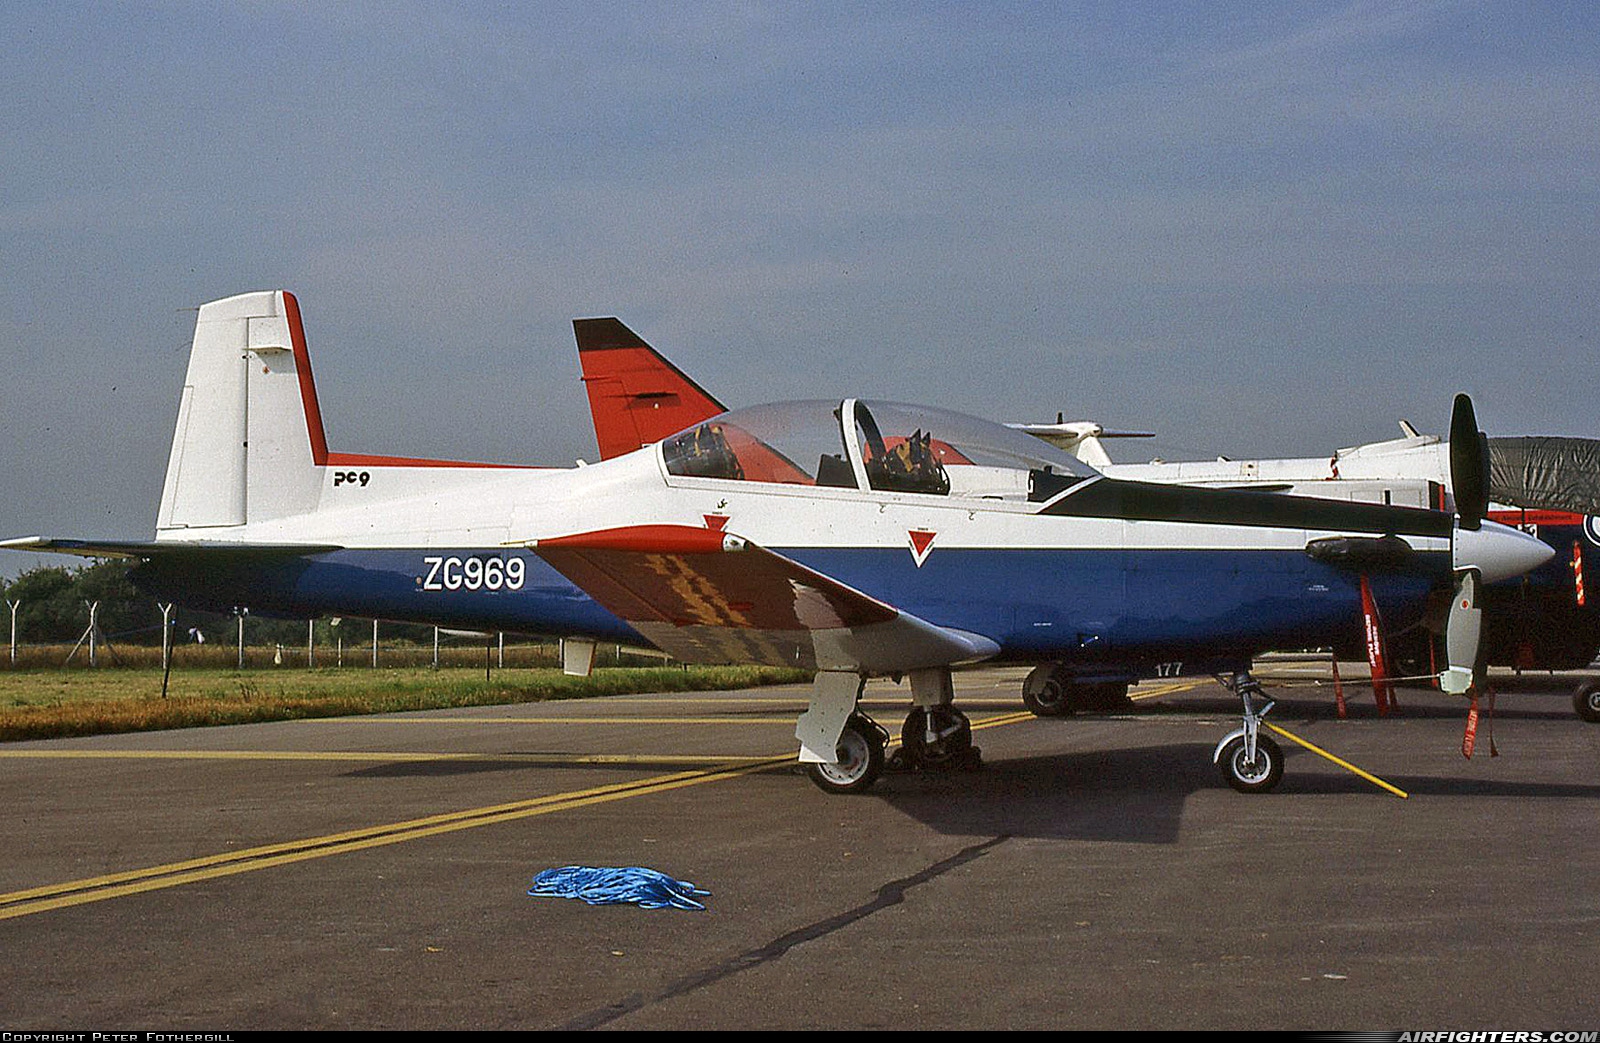 Company Owned - BAe Systems Pilatus PC-9A ZG969 at Fairford (FFD / EGVA), UK